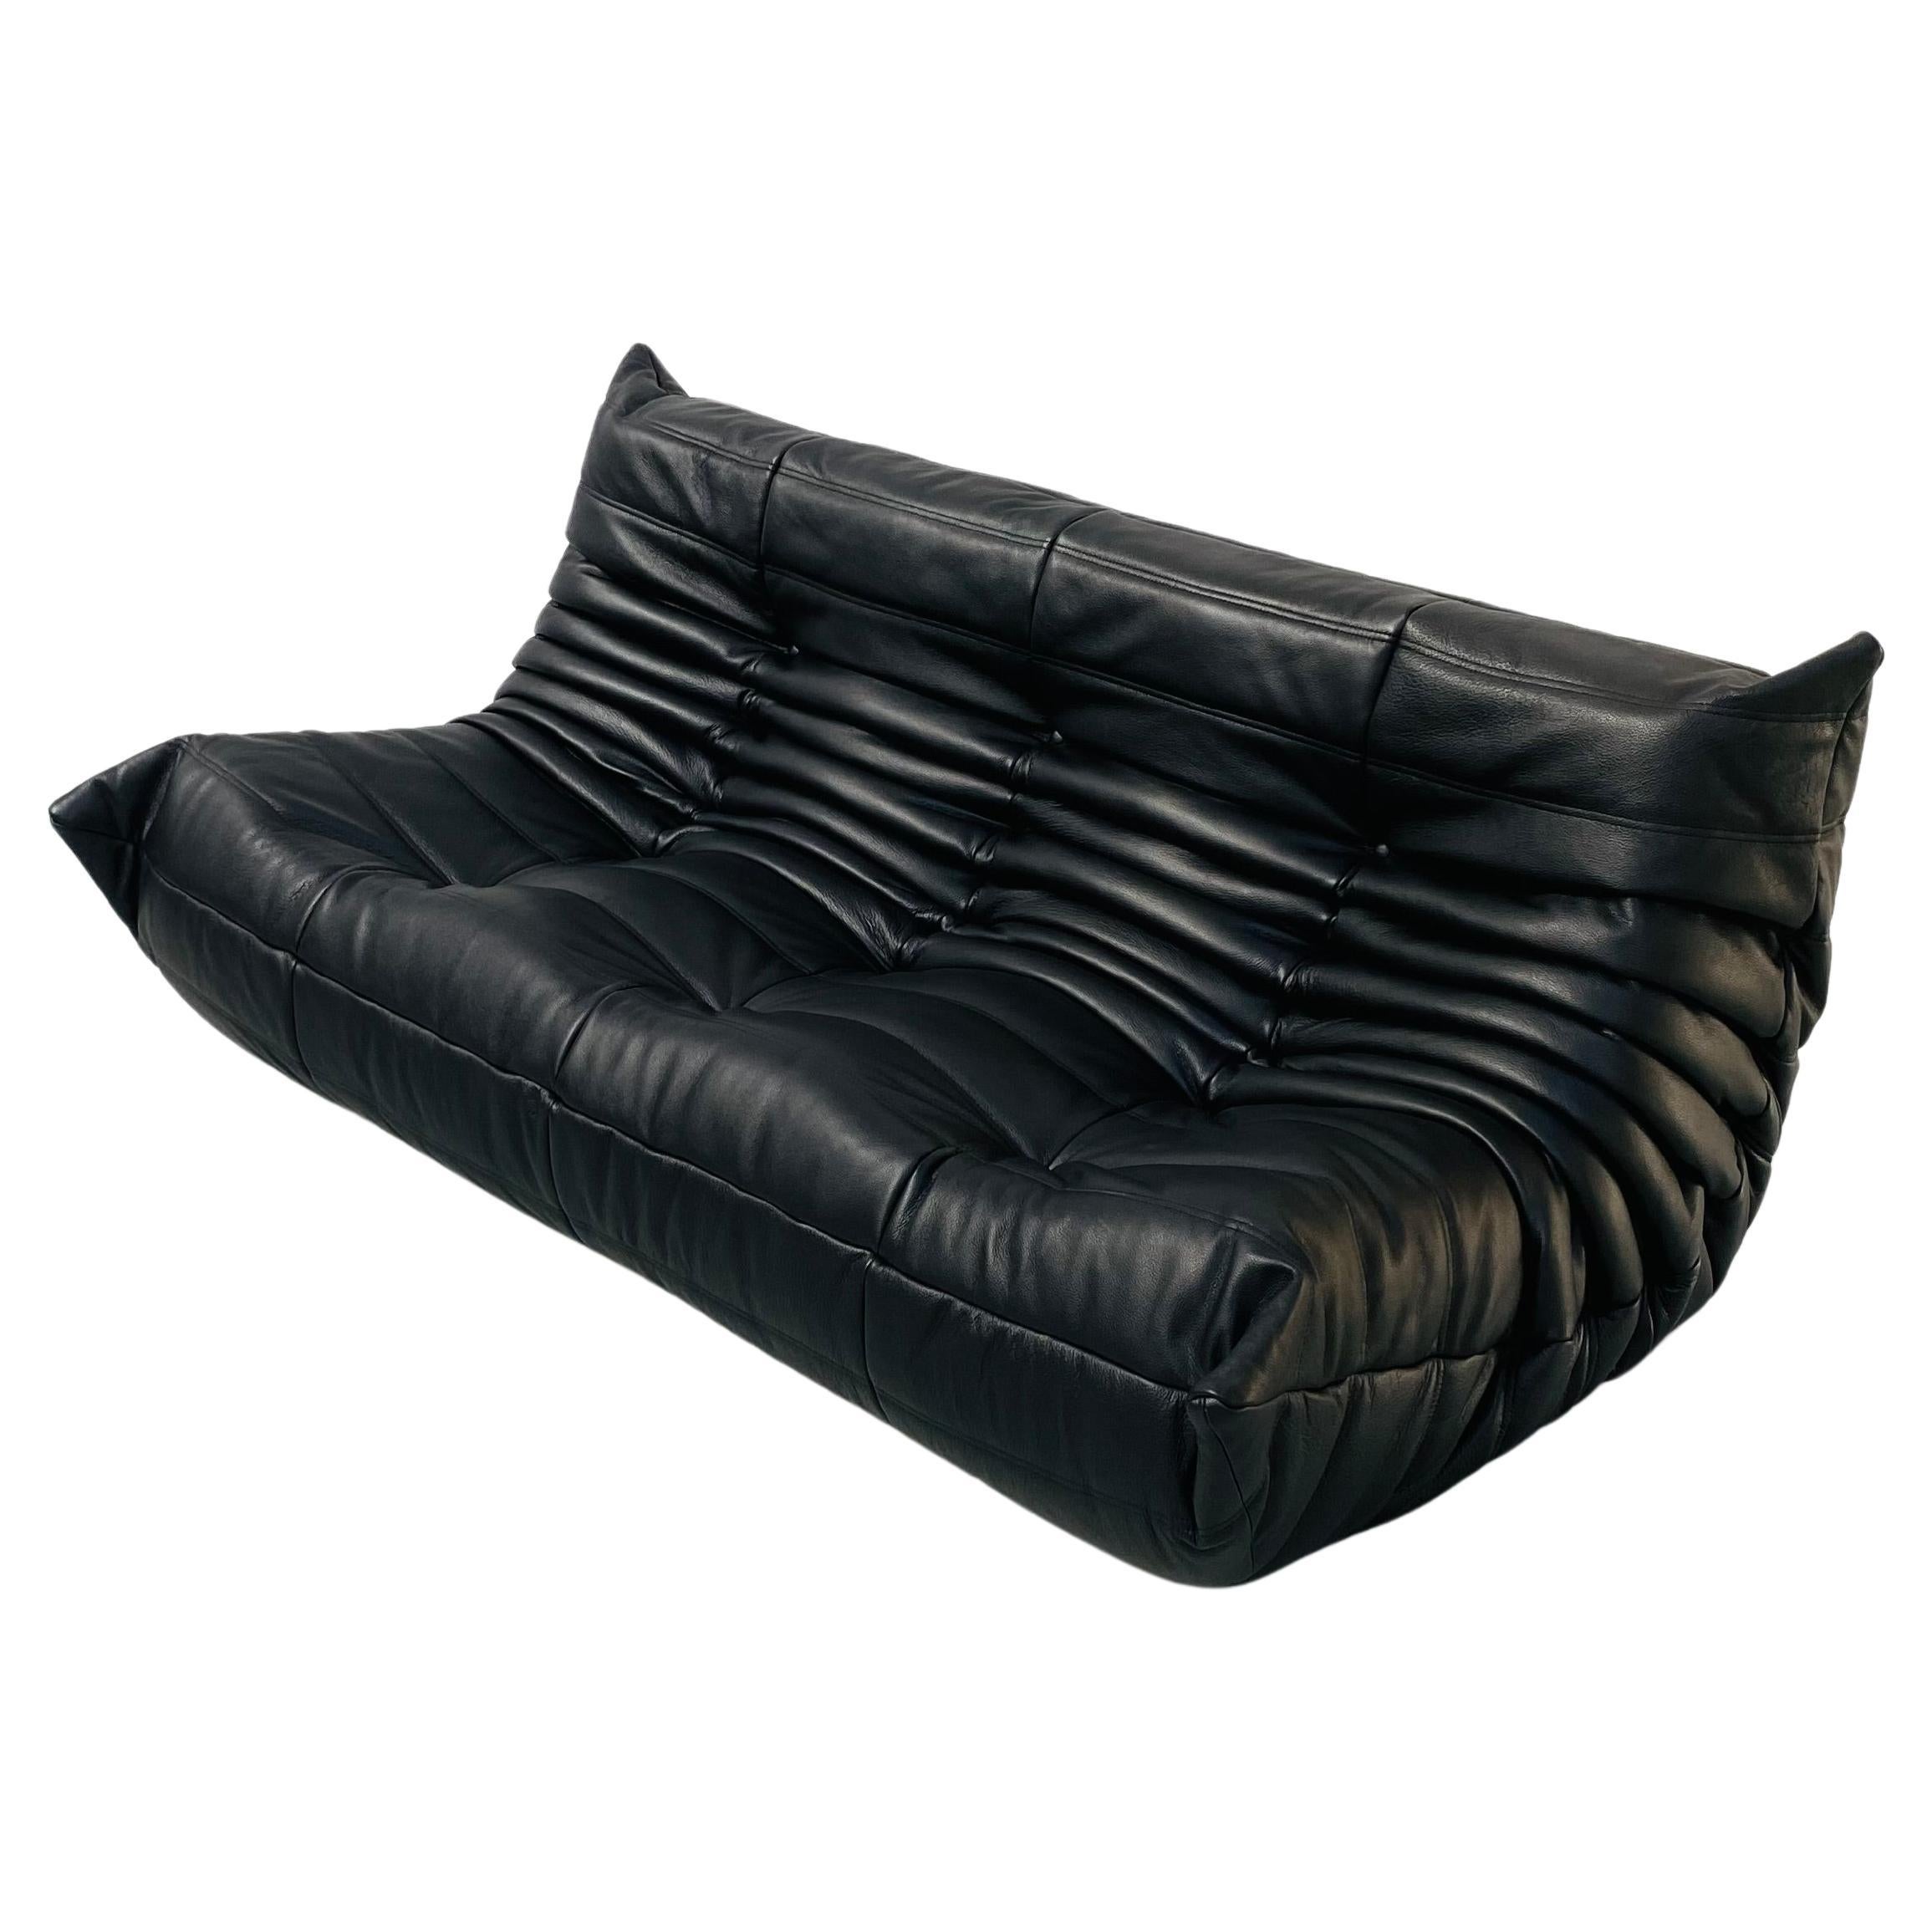 French Togo Sofa in Black Leather by Michel Ducaroy for Ligne Roset. For Sale